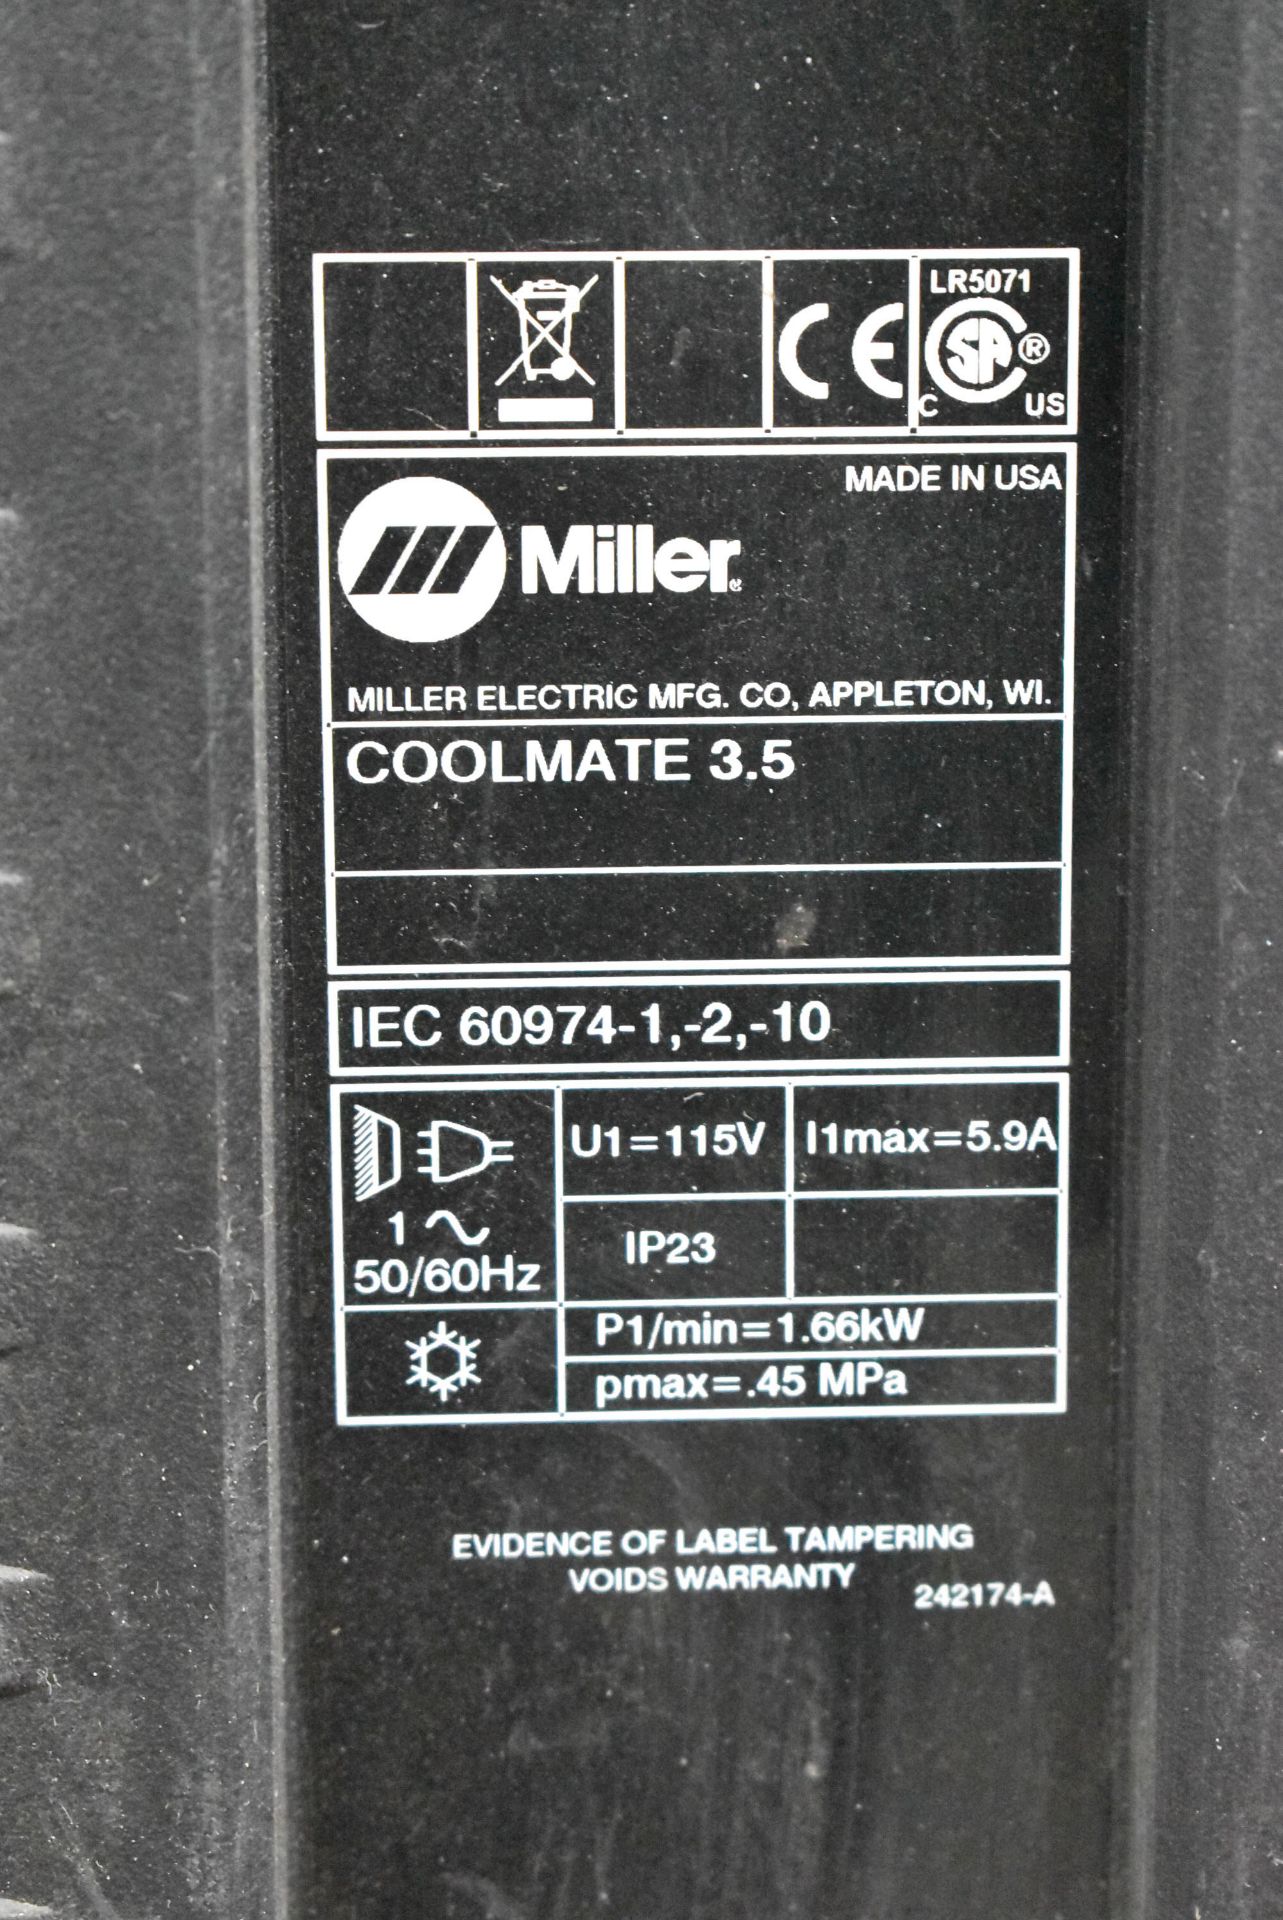 MILLER (2012) DYNASTY 350 PORTABLE DIGITAL WATER-COOLED TIG WELDERS WITH COOLMATE 3.5 WATER - Image 6 of 8